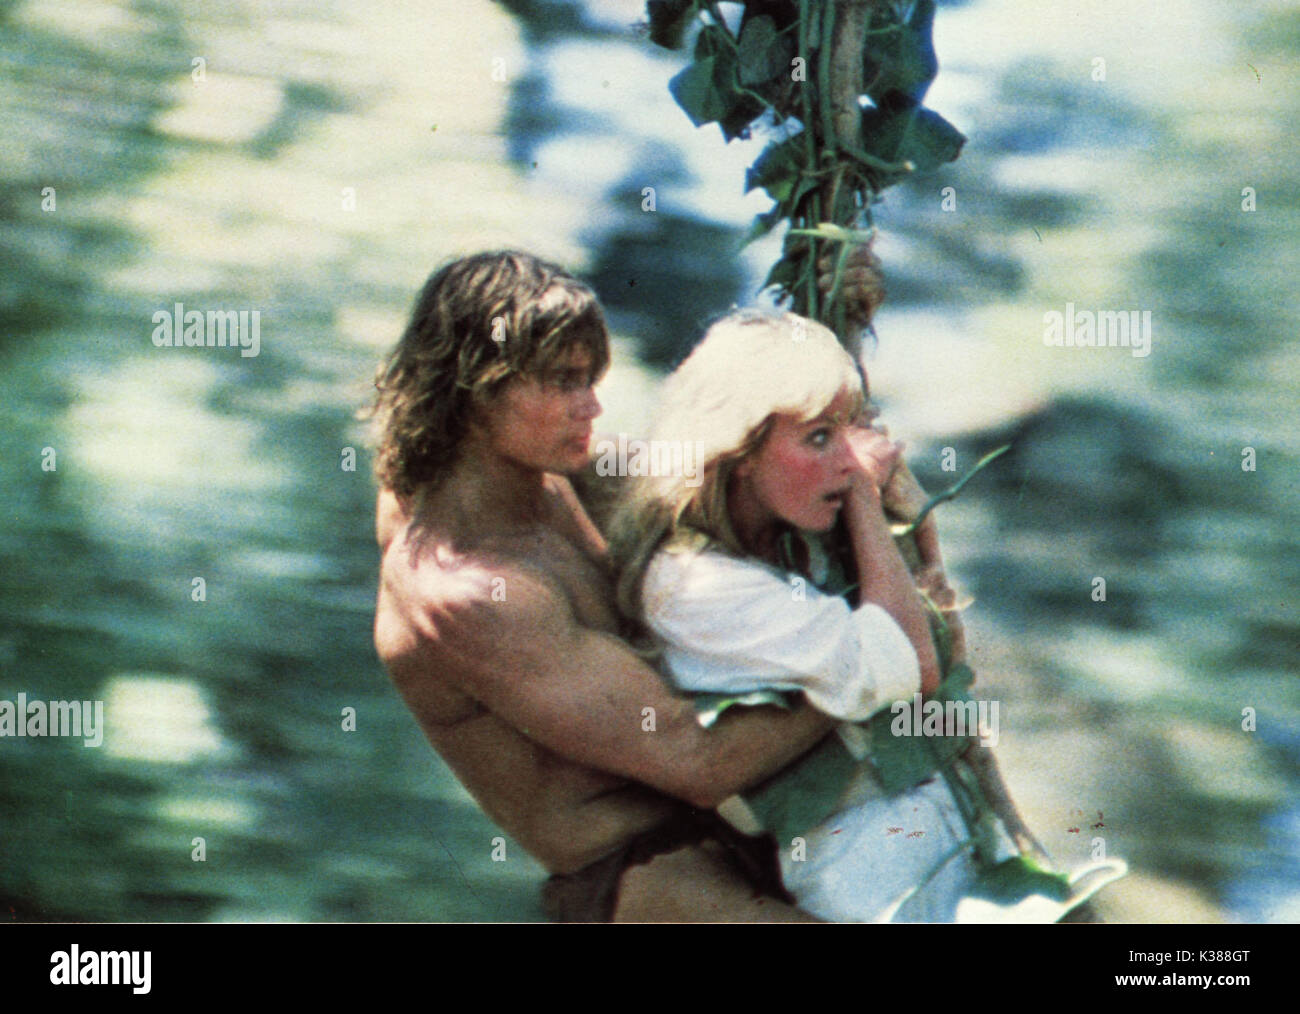 TARZAN THE APE MAN [US 1981] MILES O'KEEFE AND BO DEREK  AN MGM PICTURE     Date: 1981 Stock Photo